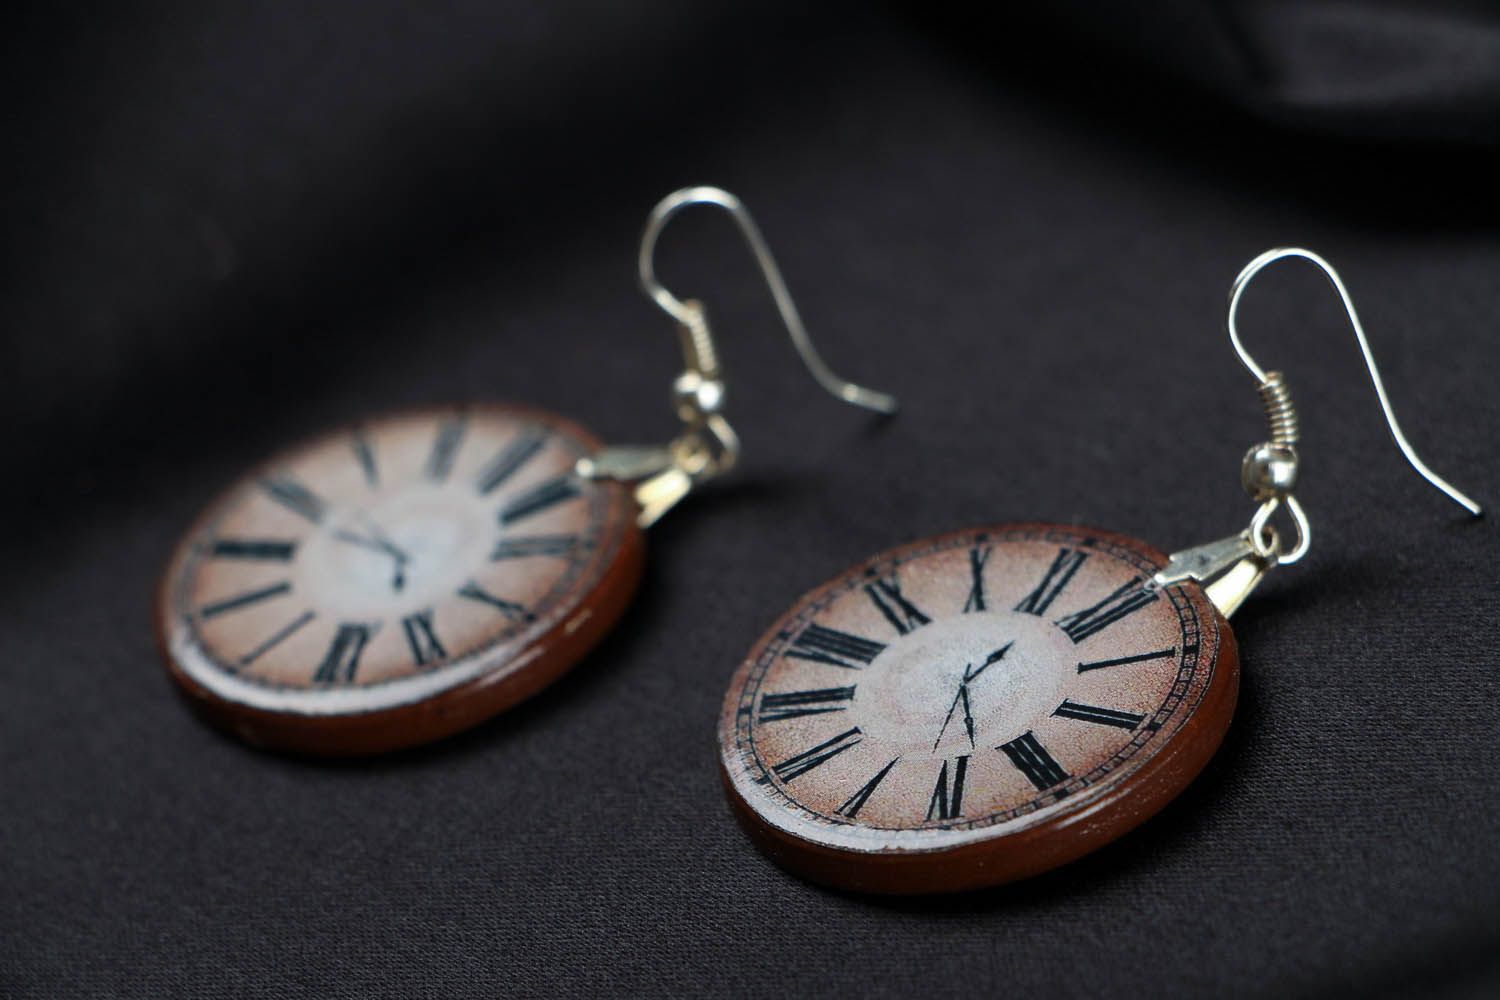 Earrings made ​​of polymer clay photo 2